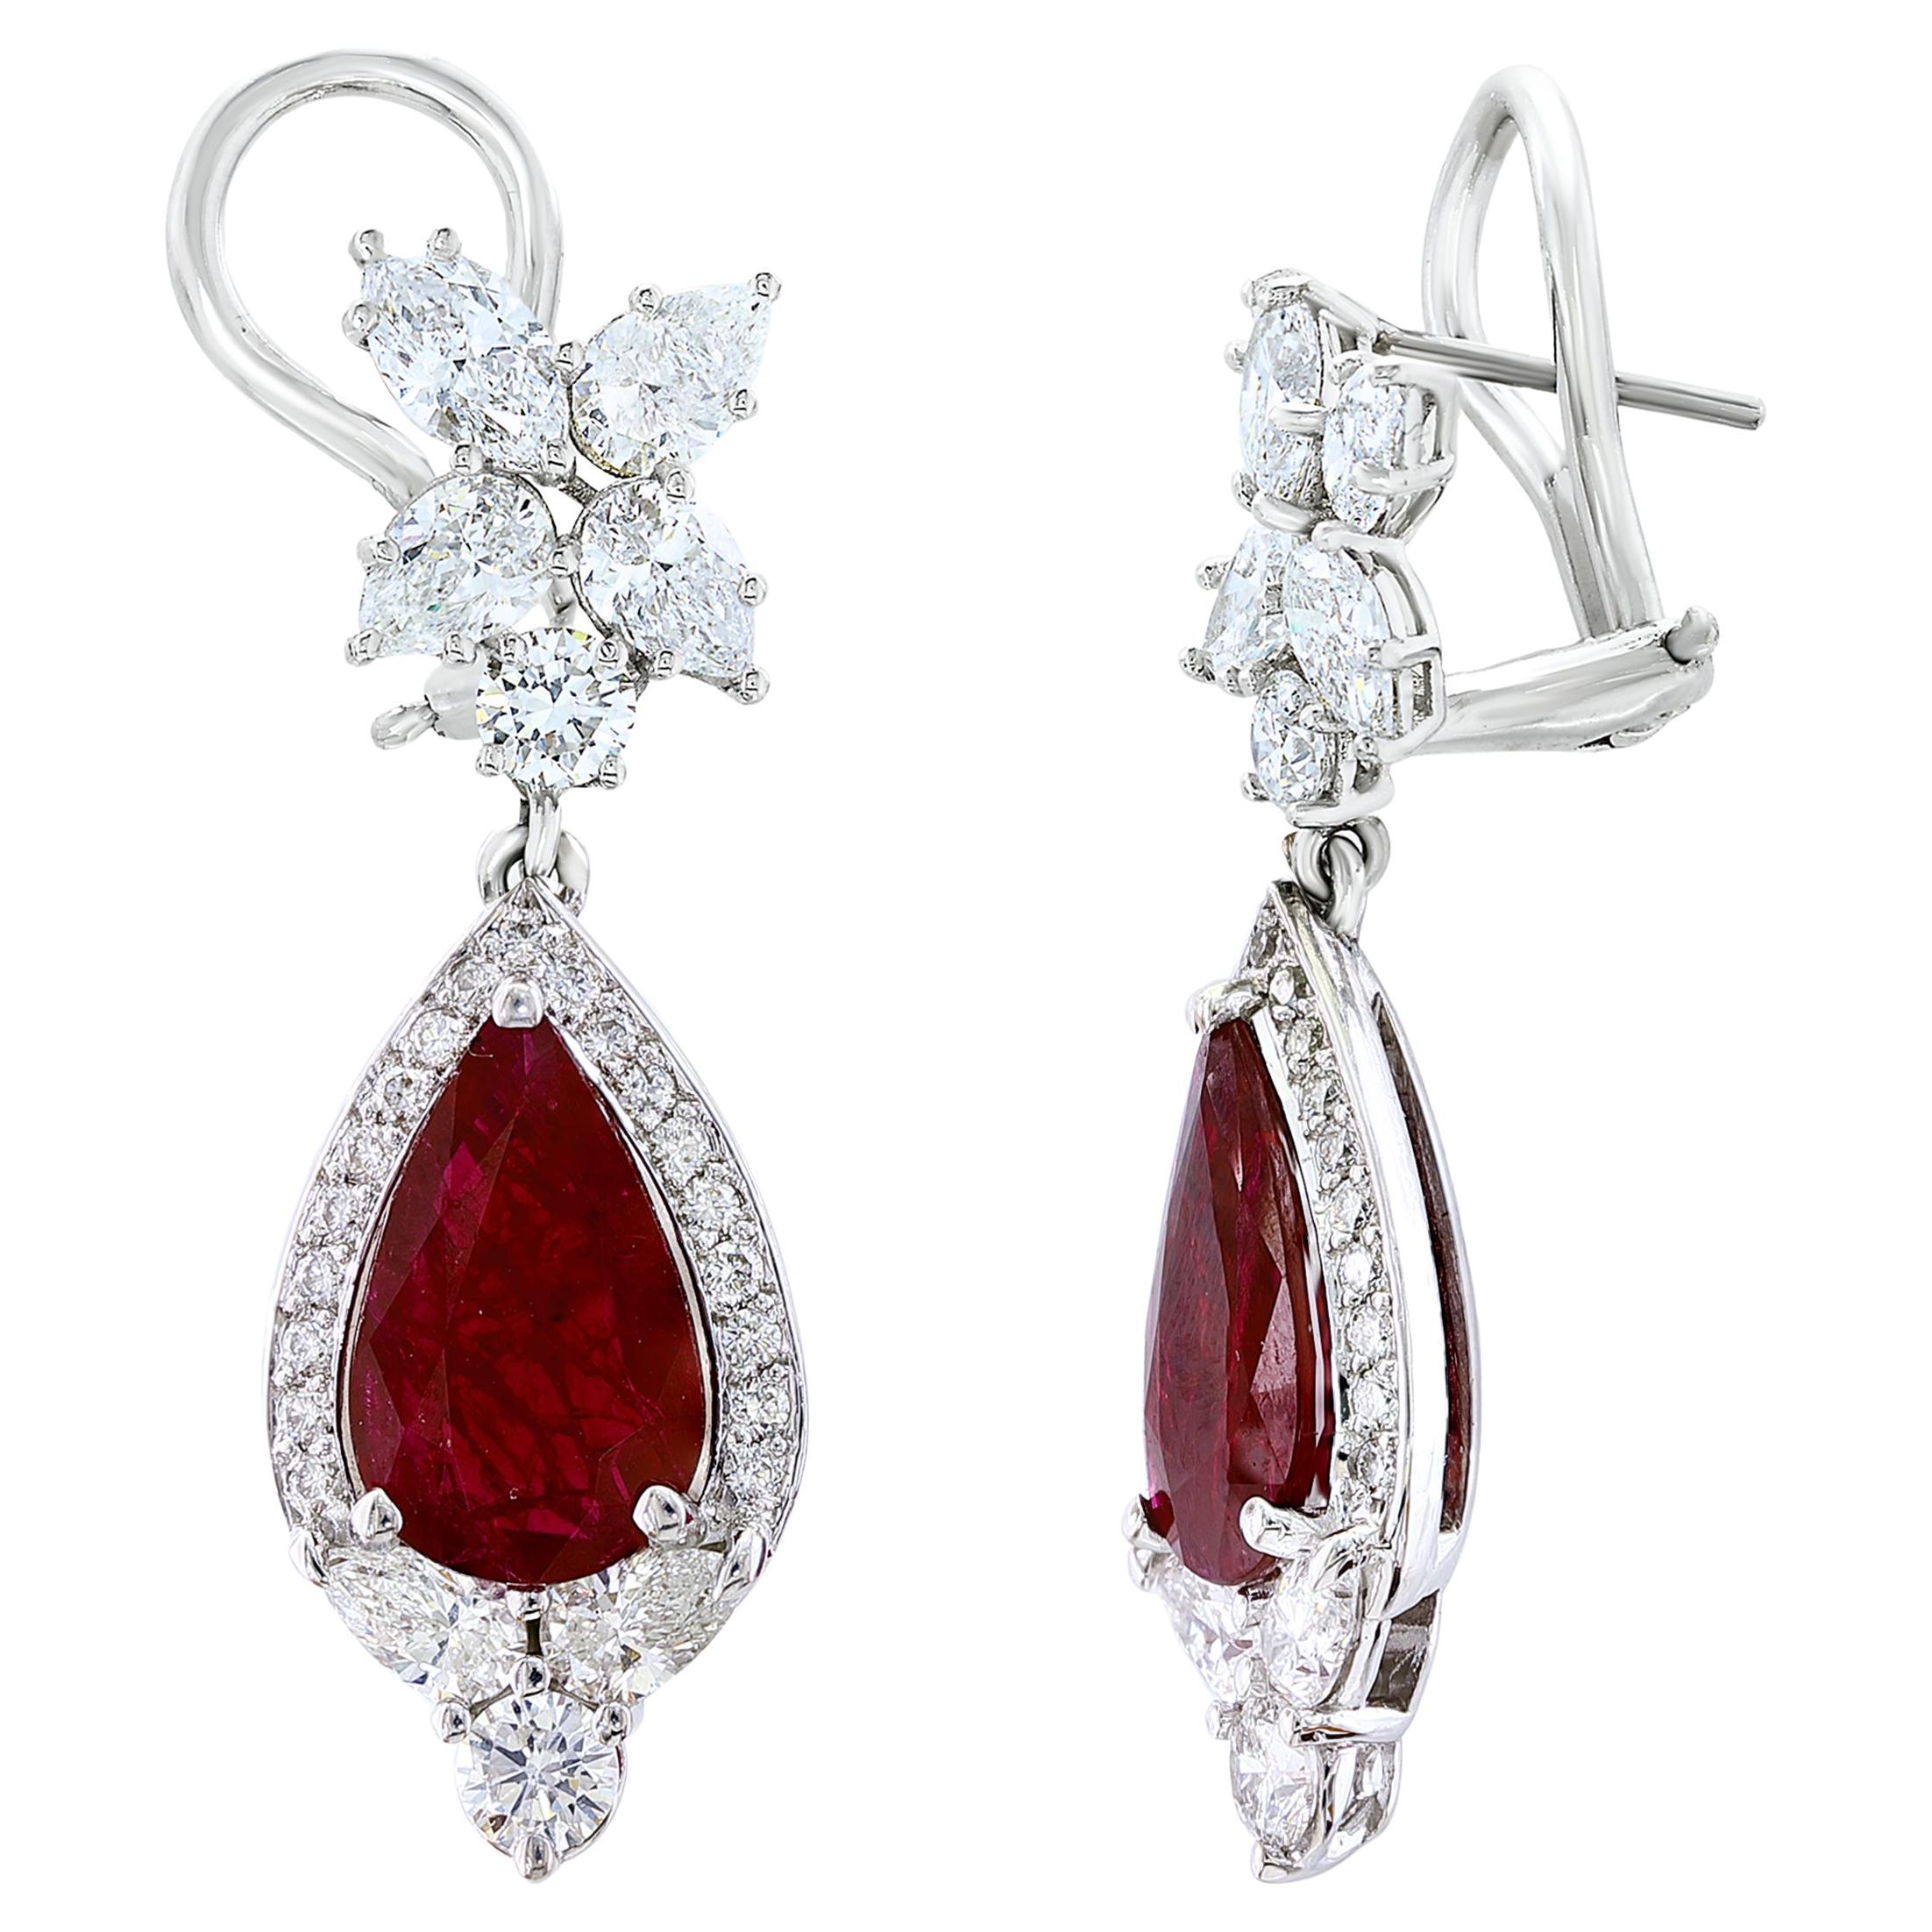 4.73 Carat Ruby and Diamond Drop Earrings in 18K White Gold